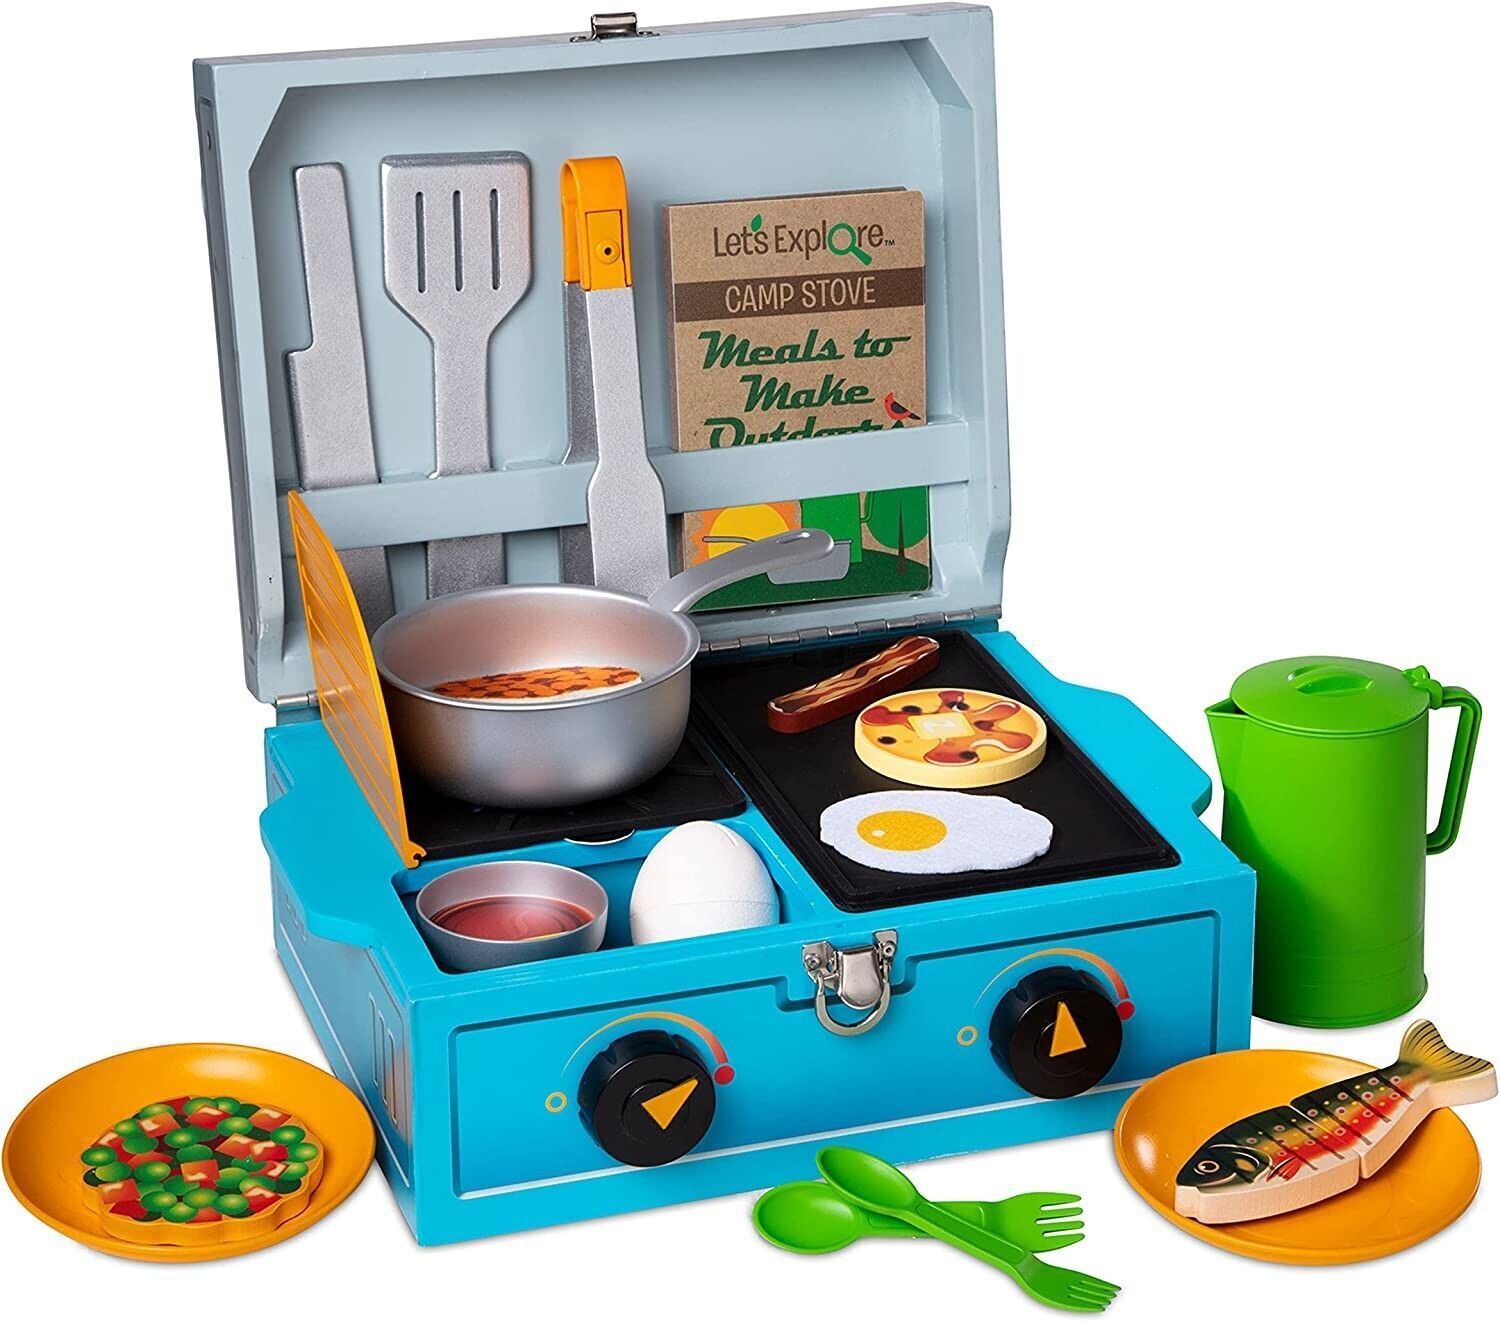 Primary image for Melissa & Doug Let’s Explore Camp Stove 24-Piece Play Set